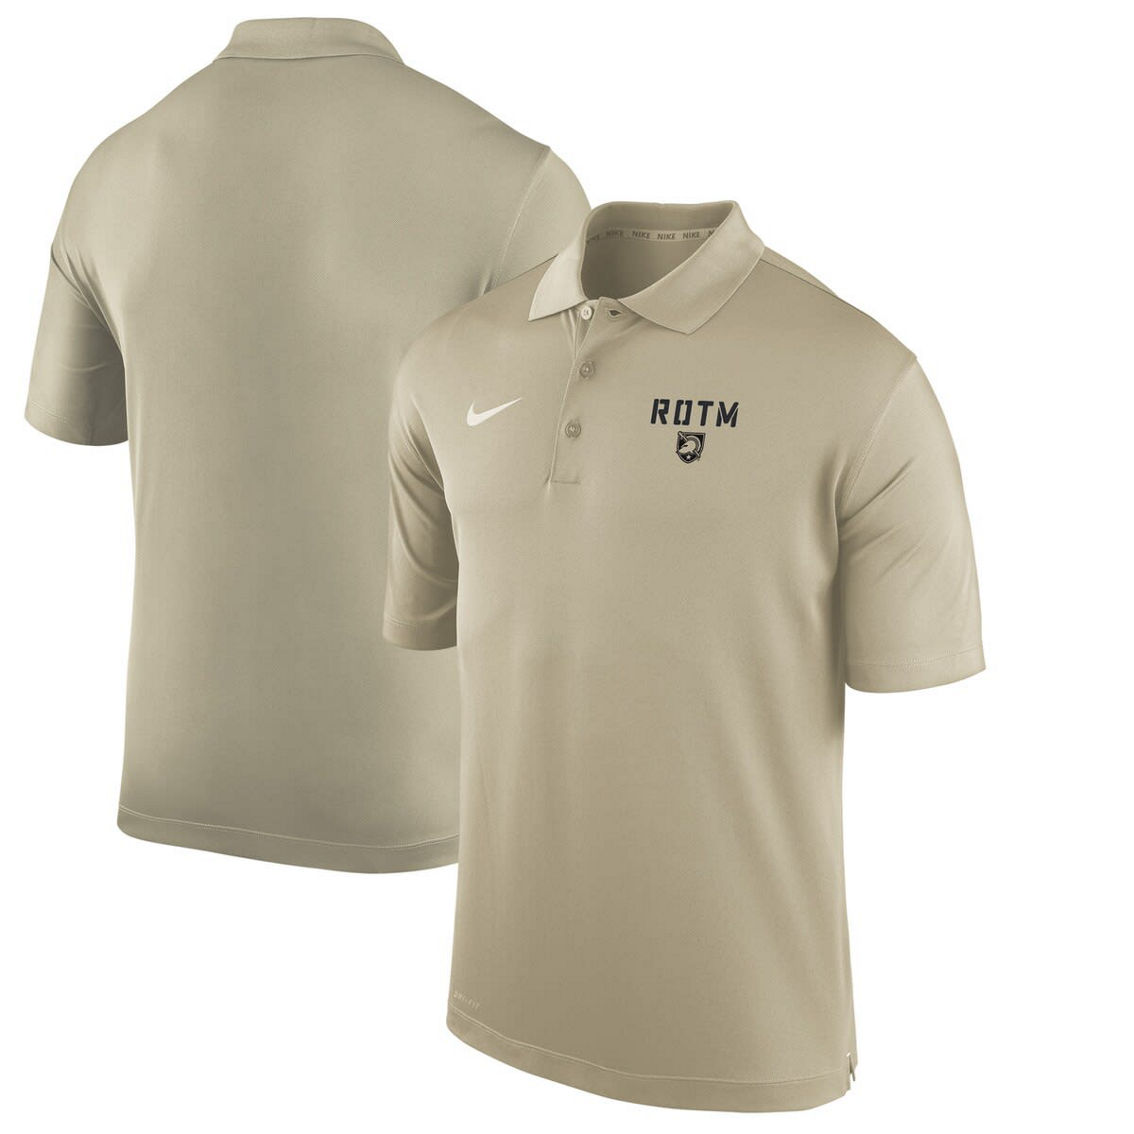 Nike Men's Tan Army Black Knights 2023 Rivalry Collection Varsity Performance Polo - Image 2 of 4